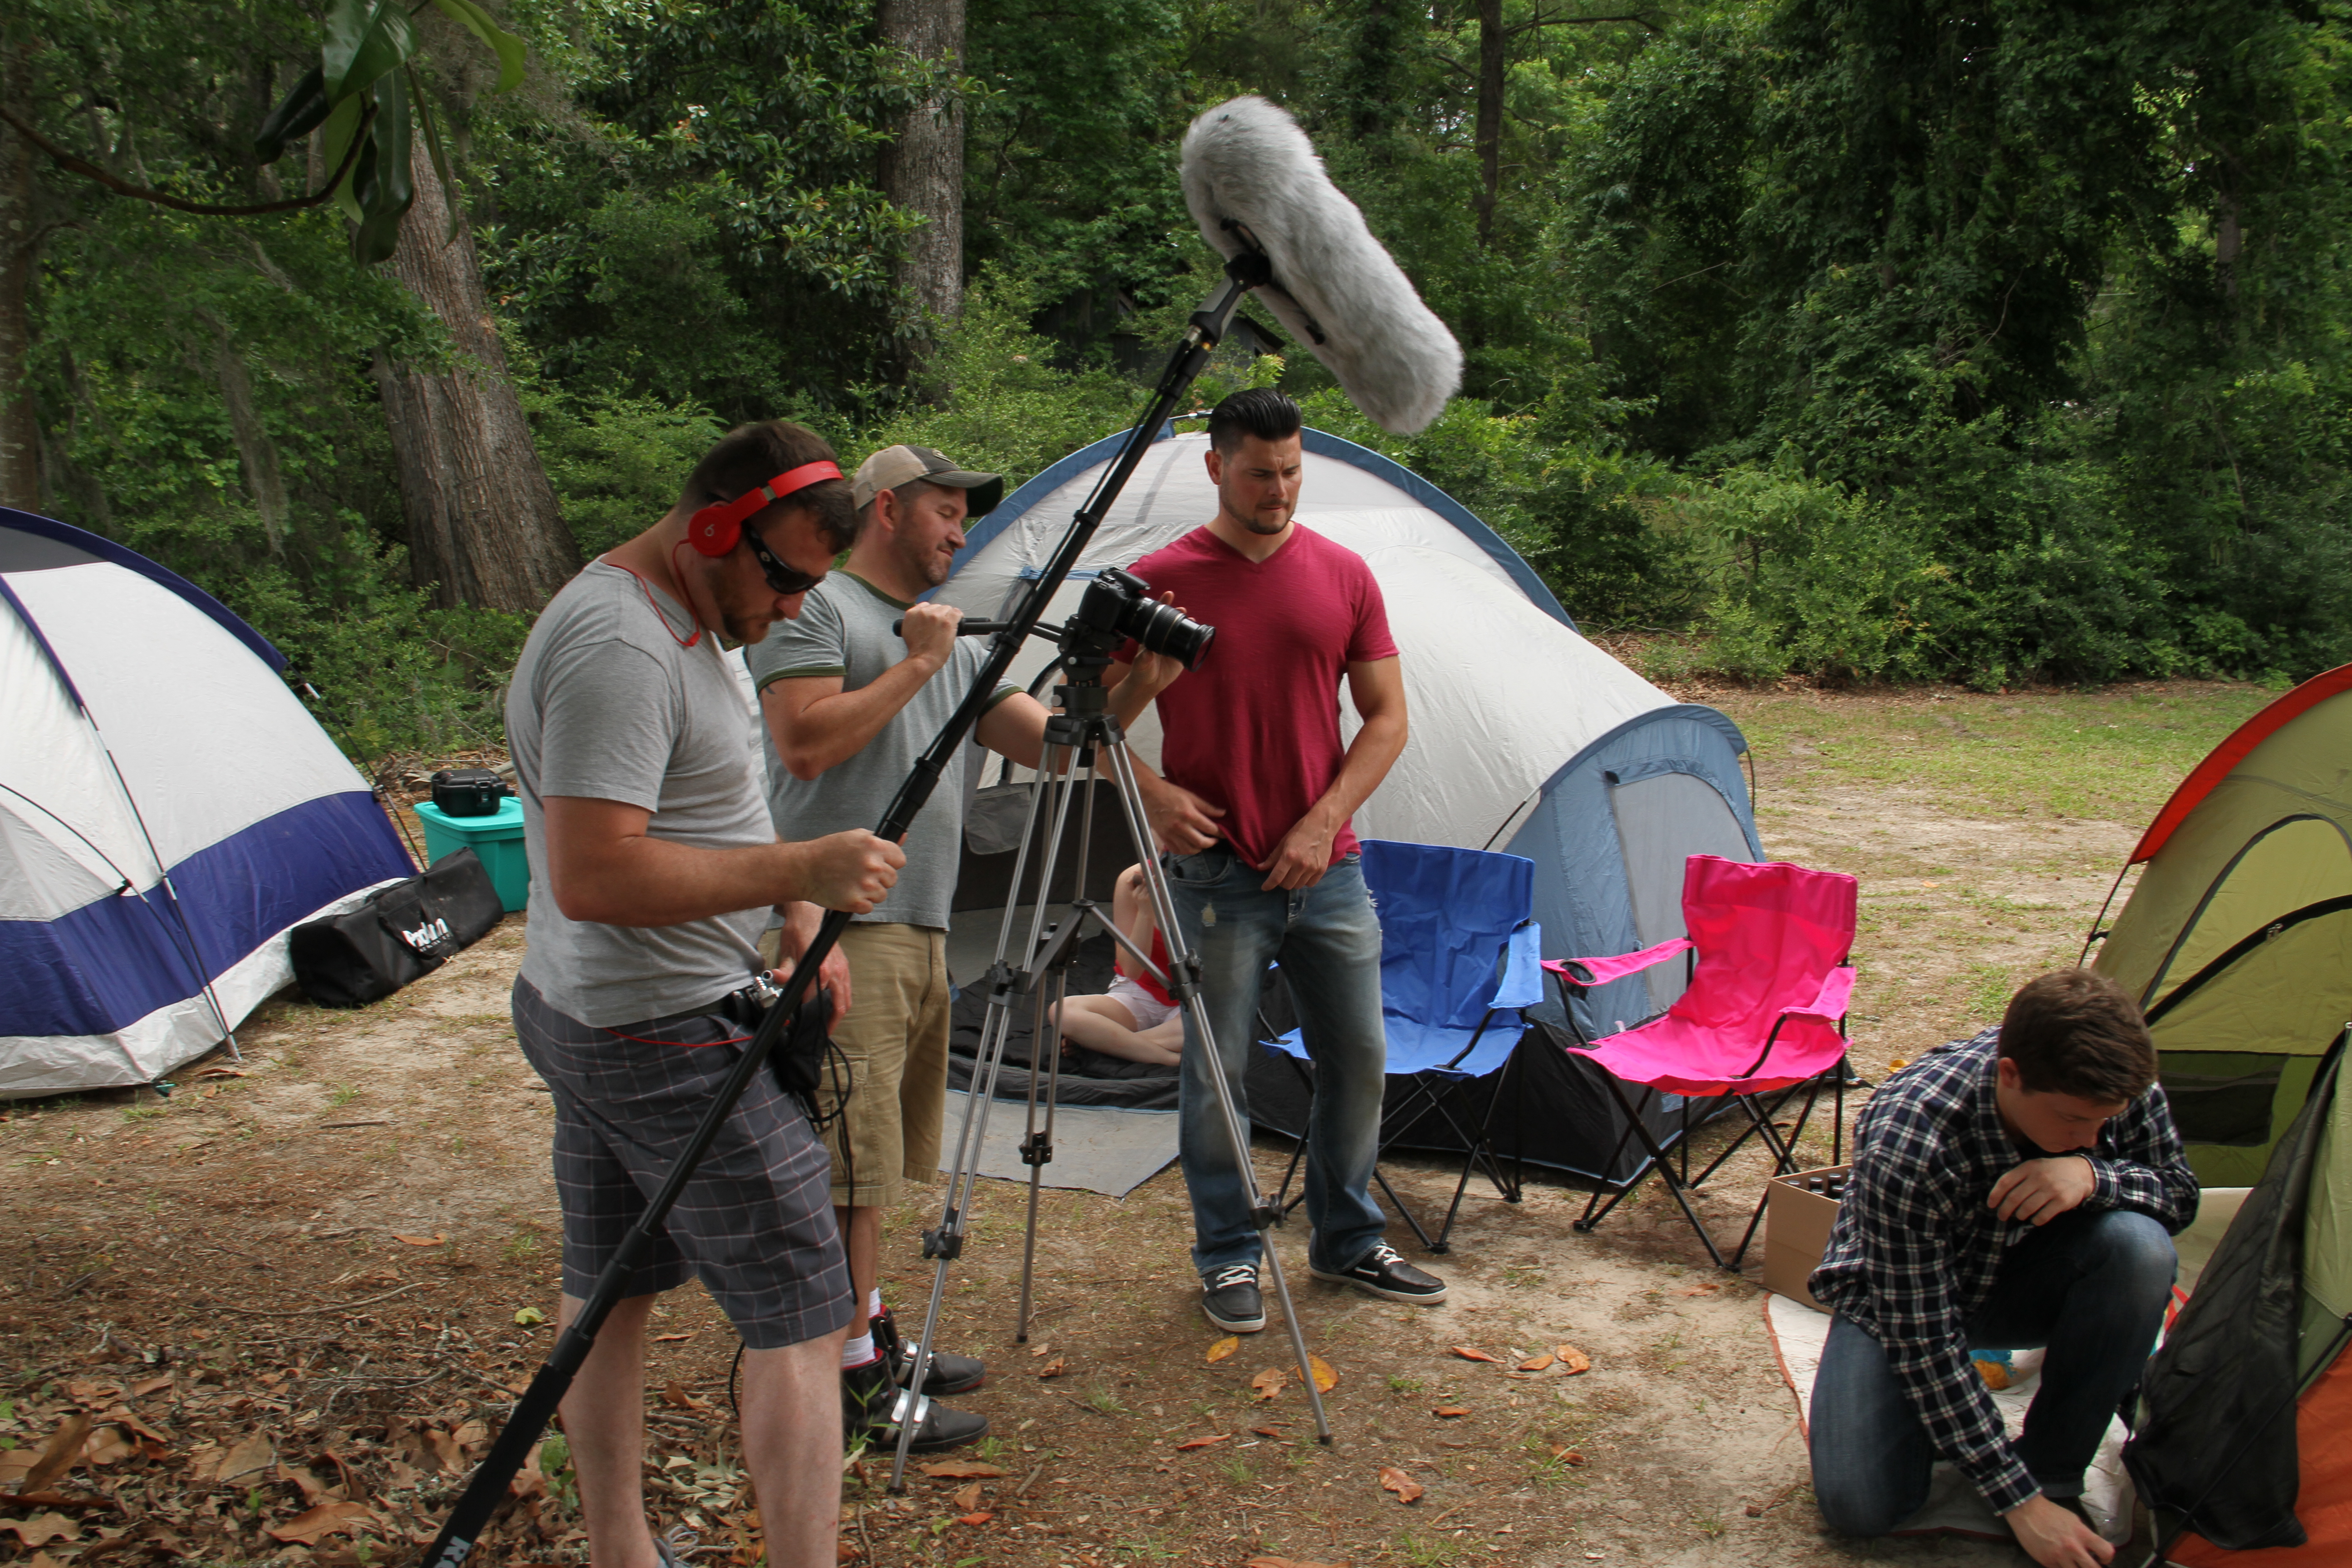 Setting up the scene with Actor Cameron Turner, Director Tommy Faircloth, Producer Robert Zobel, and myslef!